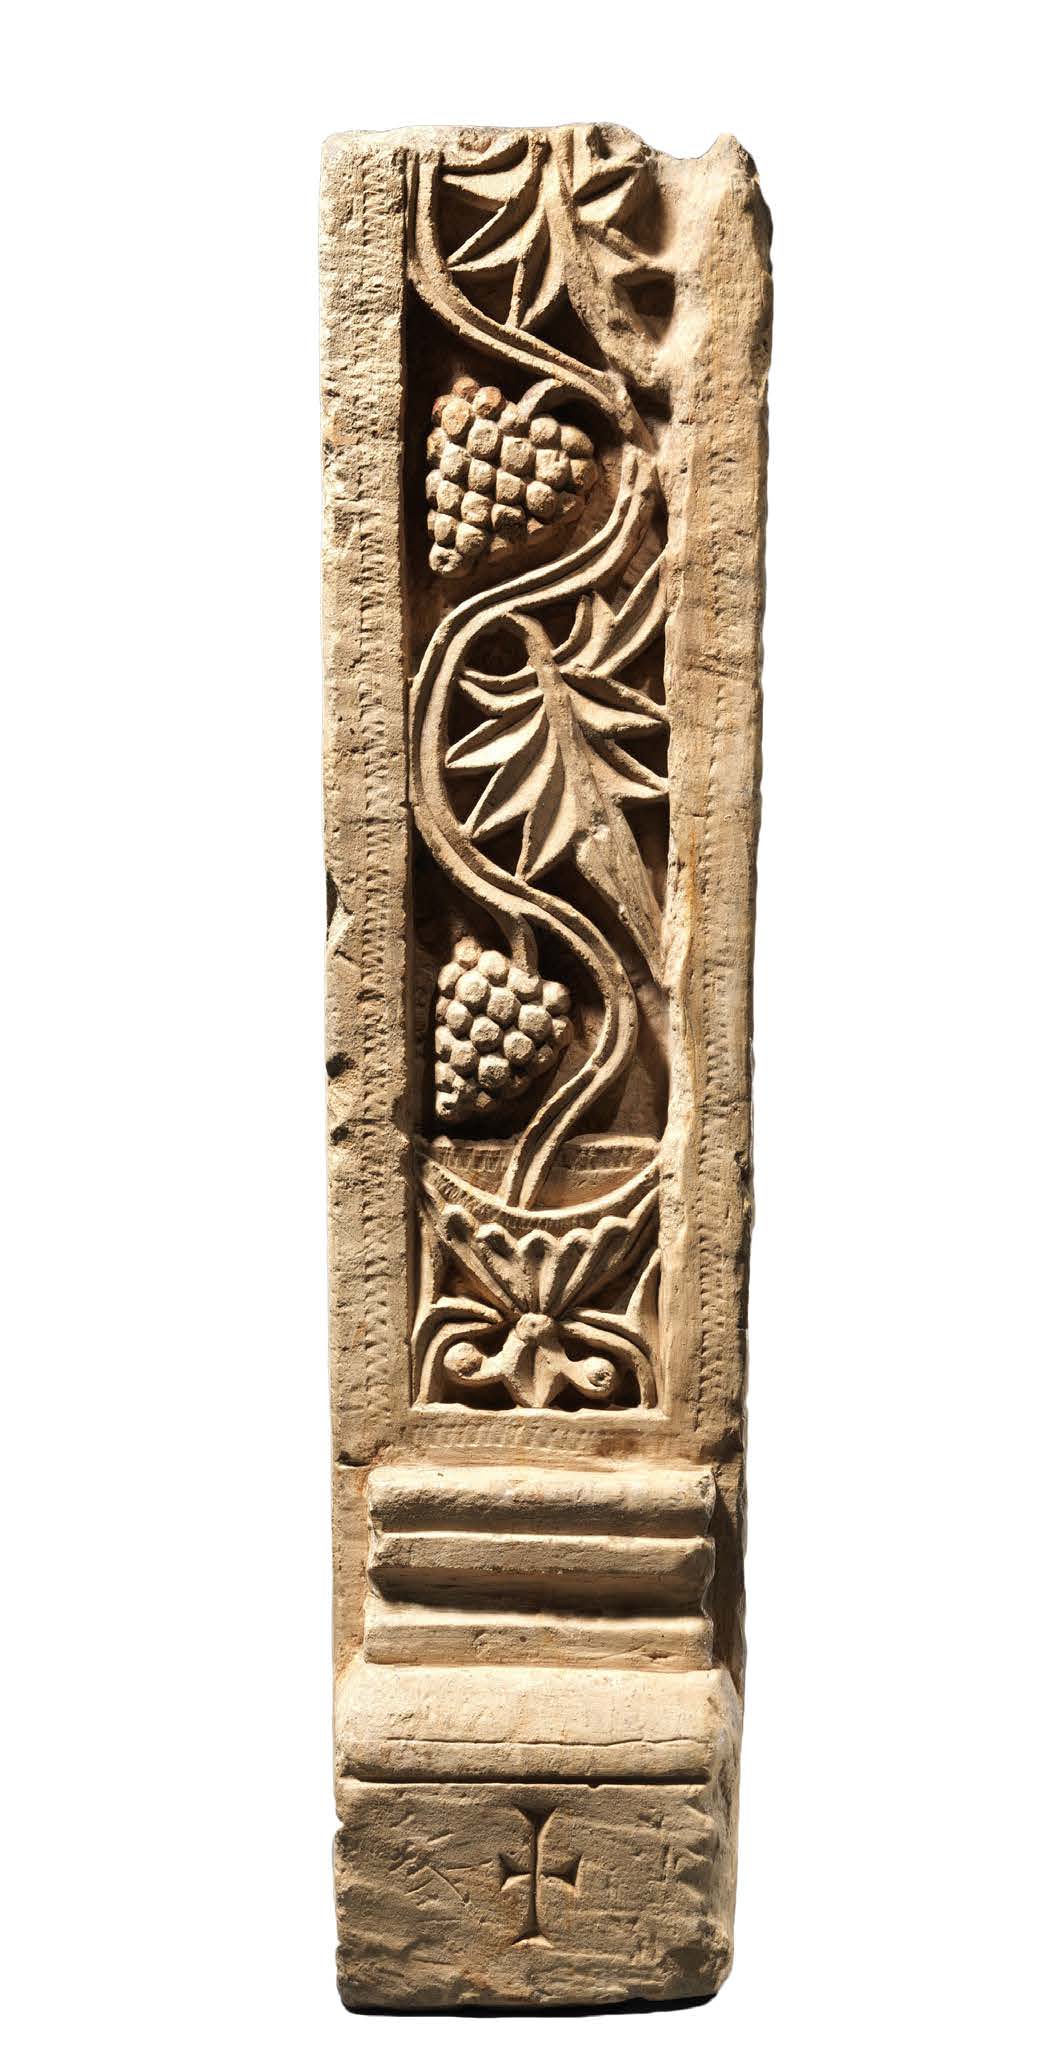 “I am the vine, ye are the branches: He that abideth in me, and I in him, the same bringeth forth much fruit: for without me ye can do nothing” ( John 15:5). Door Post with Grapevine Emerging from a Chalice, sixth–seventh century. The Metropolitan Museum of Art, New York, Rogers Fund, 1910.